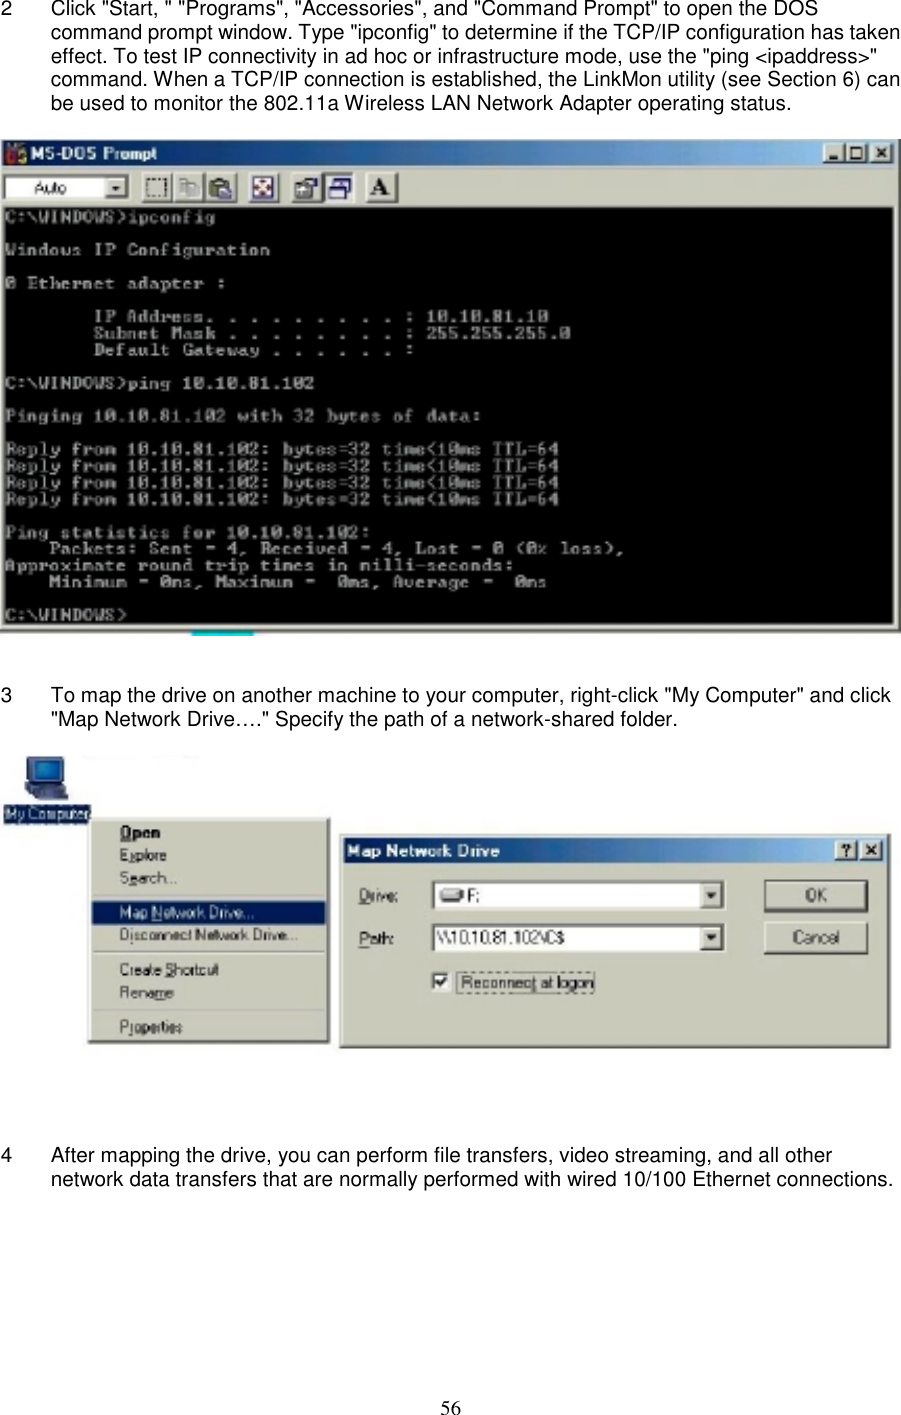 562  Click &quot;Start, &quot; &quot;Programs&quot;, &quot;Accessories&quot;, and &quot;Command Prompt&quot; to open the DOScommand prompt window. Type &quot;ipconfig&quot; to determine if the TCP/IP configuration has takeneffect. To test IP connectivity in ad hoc or infrastructure mode, use the &quot;ping &lt;ipaddress&gt;&quot;command. When a TCP/IP connection is established, the LinkMon utility (see Section 6) canbe used to monitor the 802.11a Wireless LAN Network Adapter operating status.3  To map the drive on another machine to your computer, right-click &quot;My Computer&quot; and click&quot;Map Network Drive….&quot; Specify the path of a network-shared folder.4  After mapping the drive, you can perform file transfers, video streaming, and all othernetwork data transfers that are normally performed with wired 10/100 Ethernet connections.